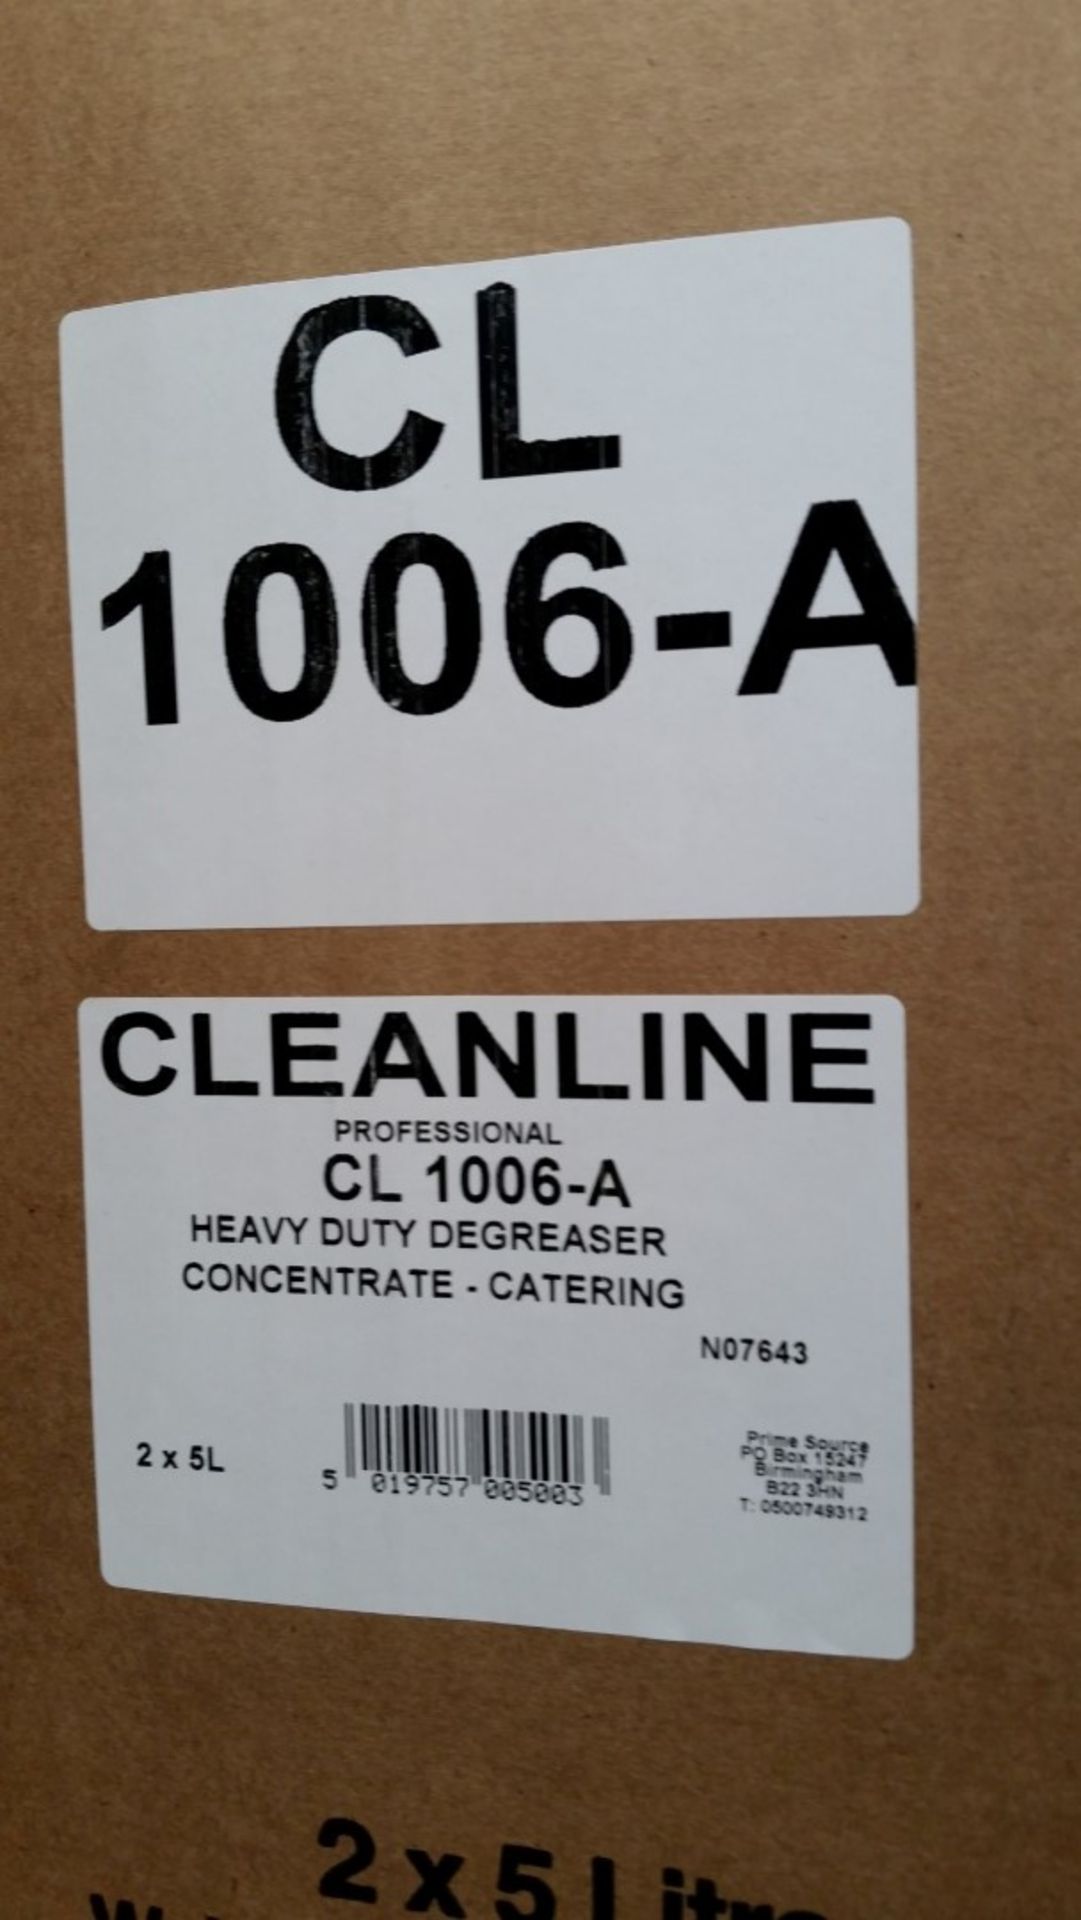 2 x Clean Line Professional 5 Litre Heavy Duty Degreaser Concentrate - Alkaline Cleaner & - Image 2 of 5